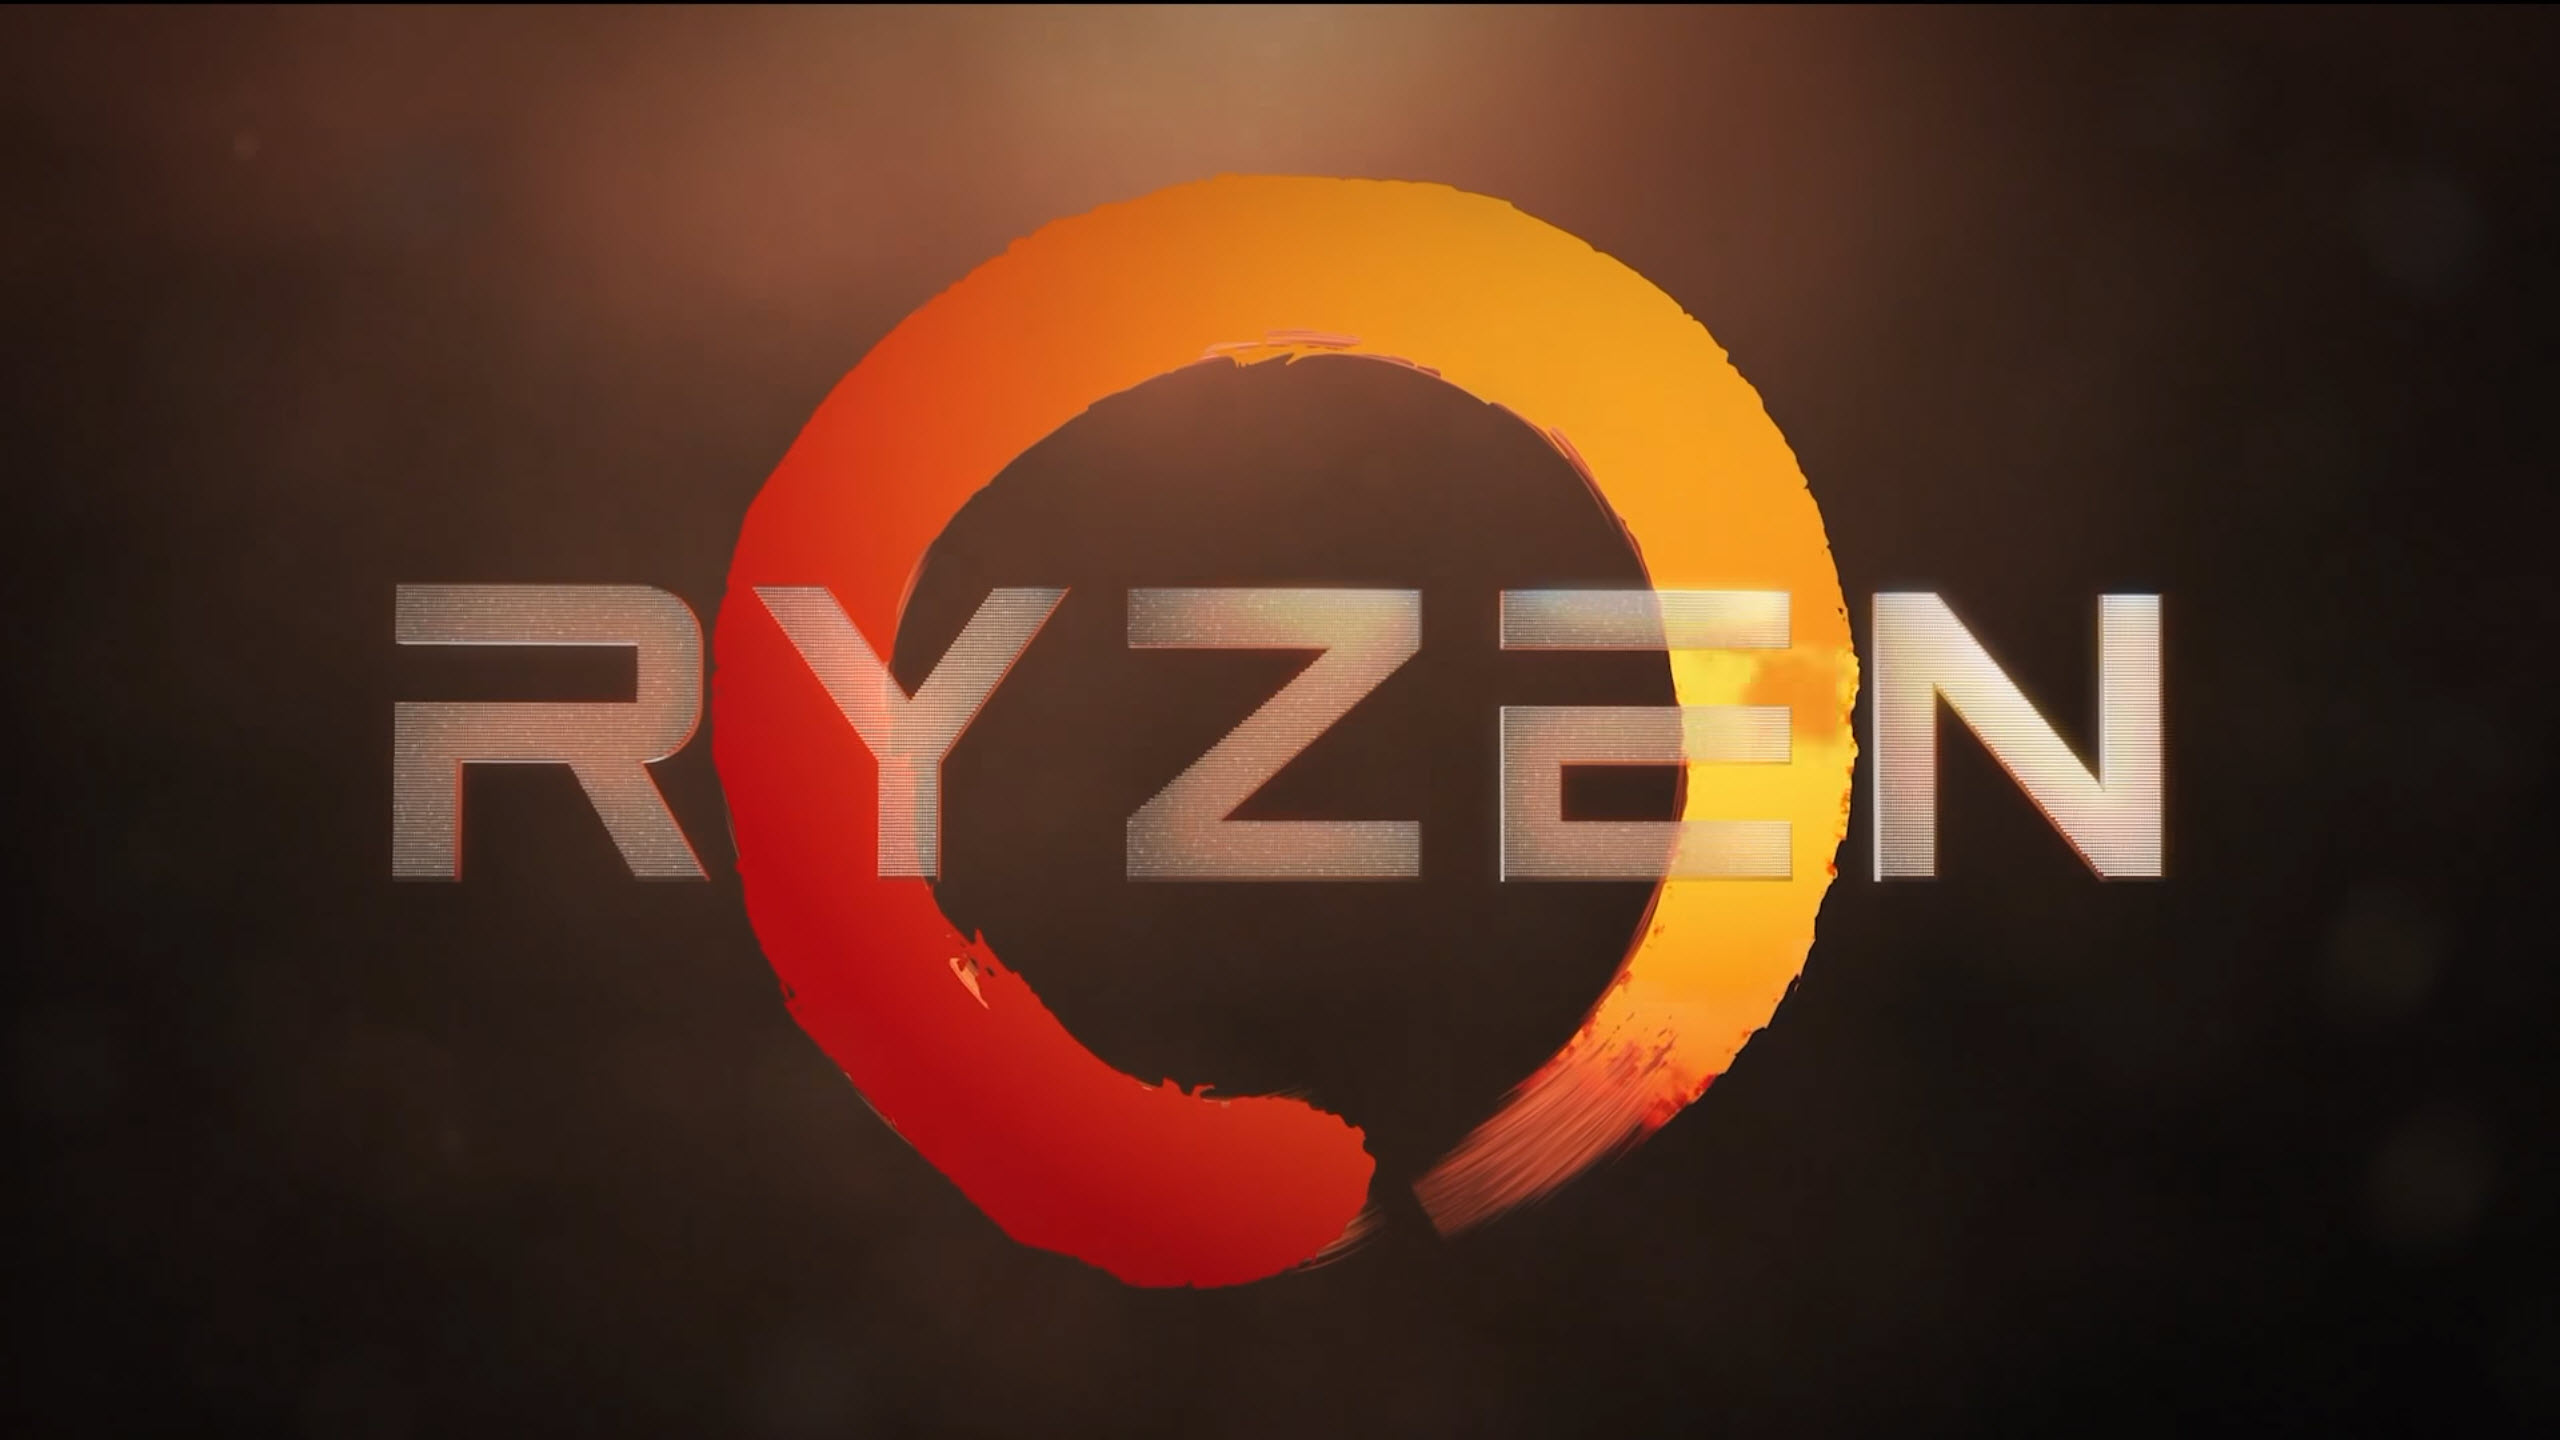 AMD Ryzen CPUs In-Stock, But Where’s the AM4 Motherboards?